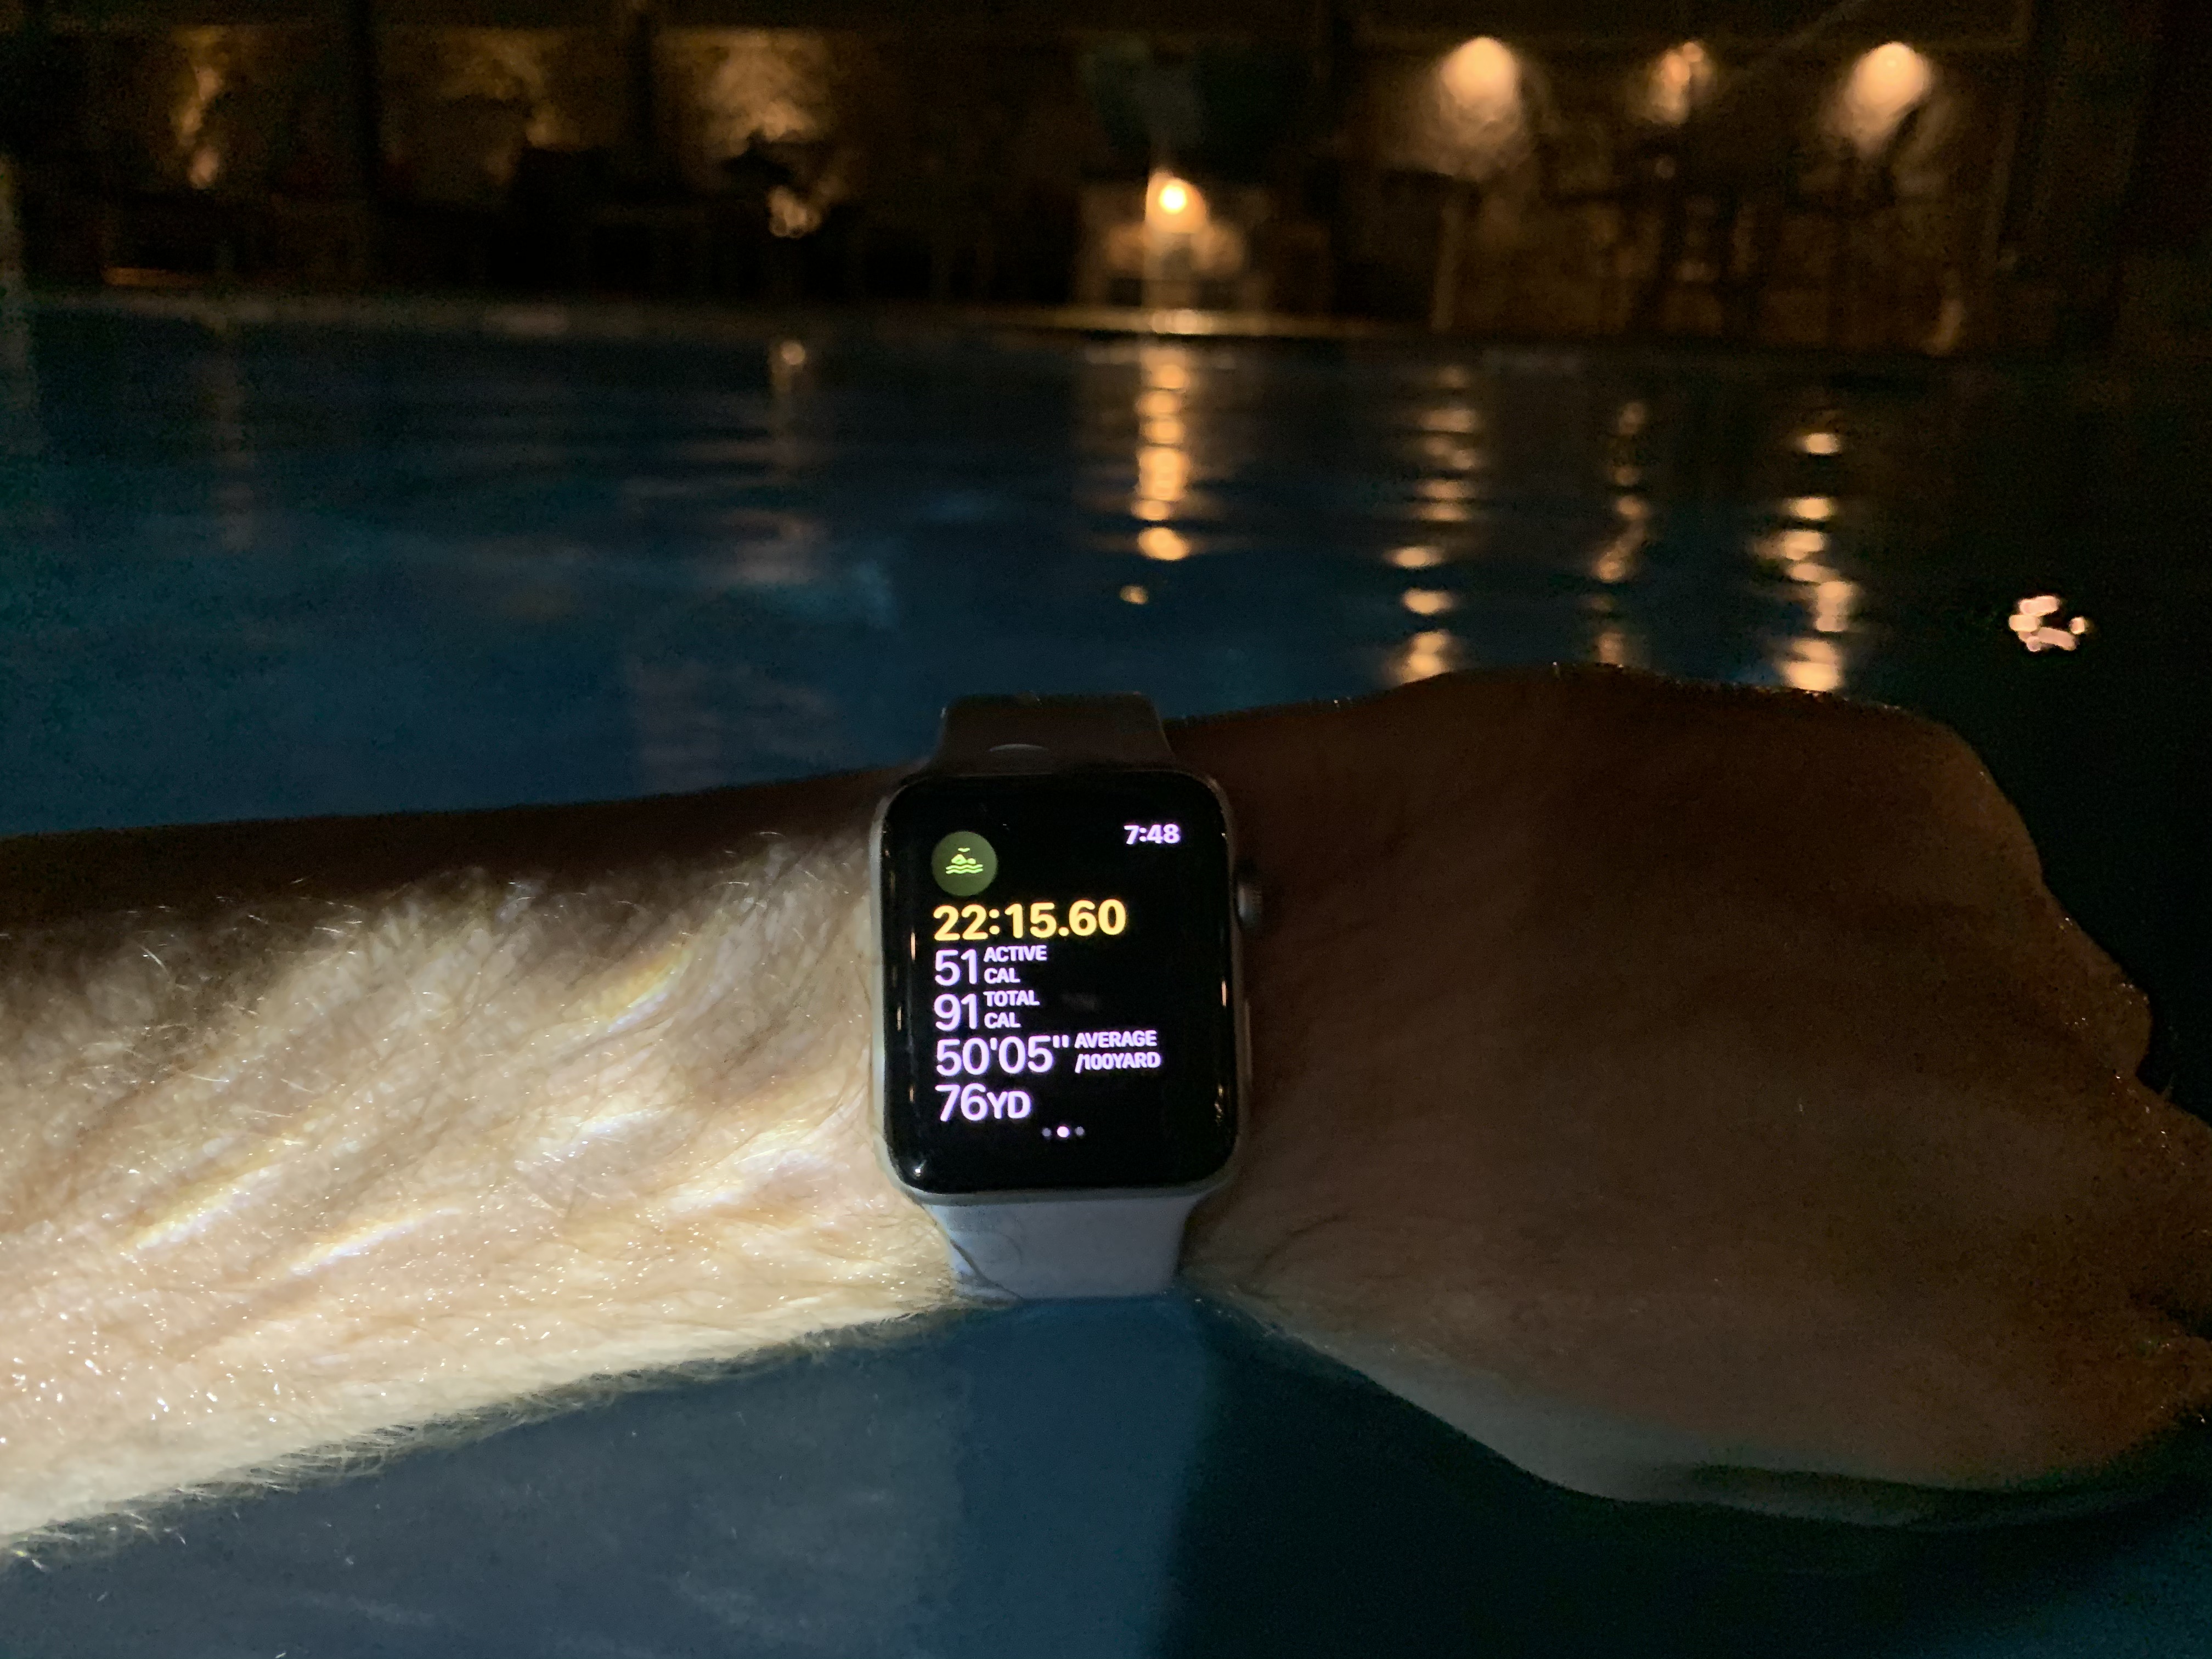 can i wear my apple watch series 3 in the pool